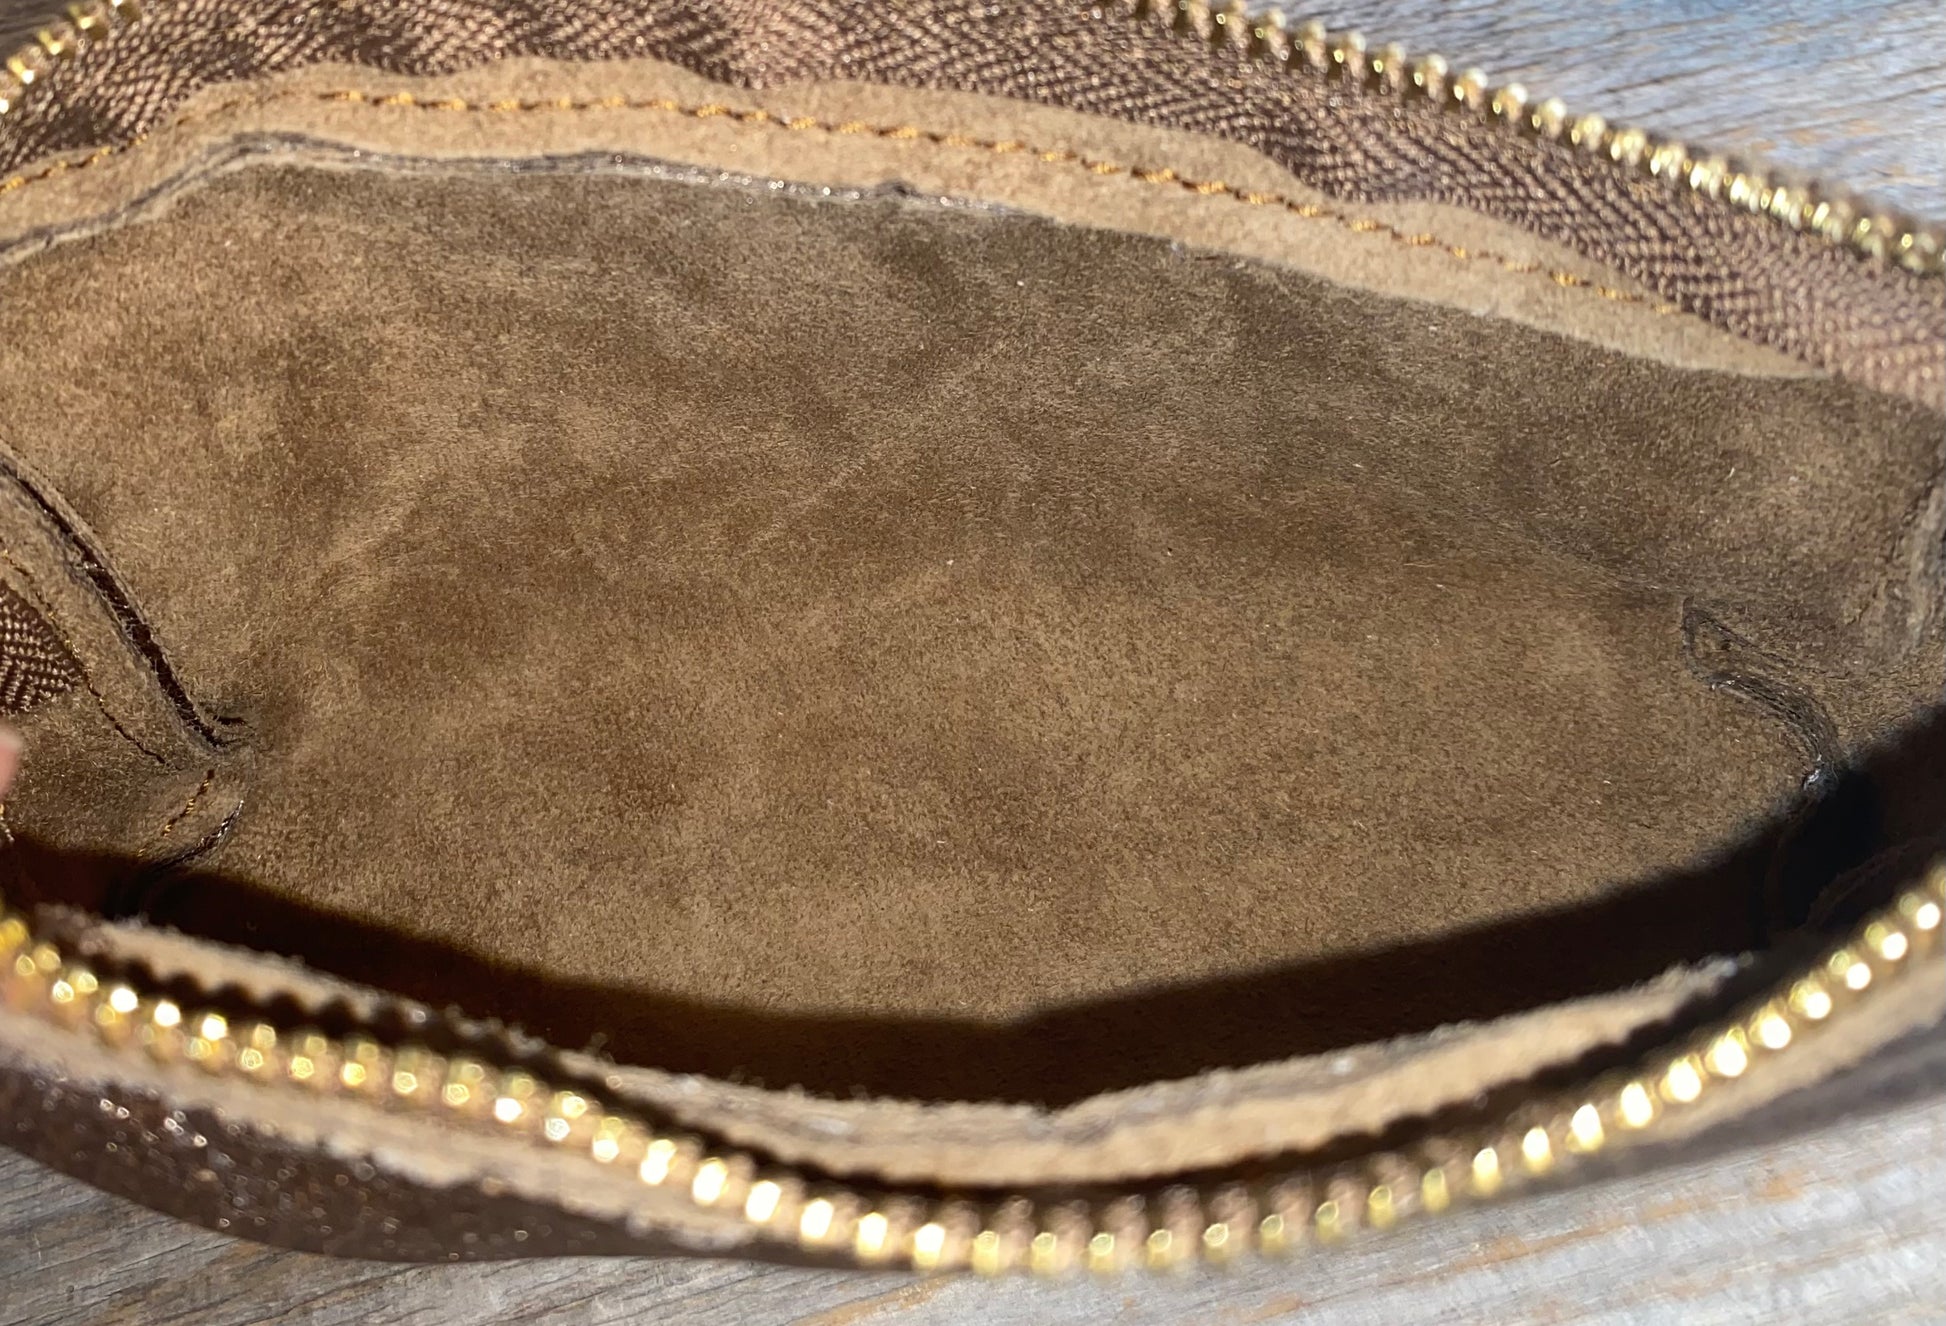 Leather Makeup Travel Pouch